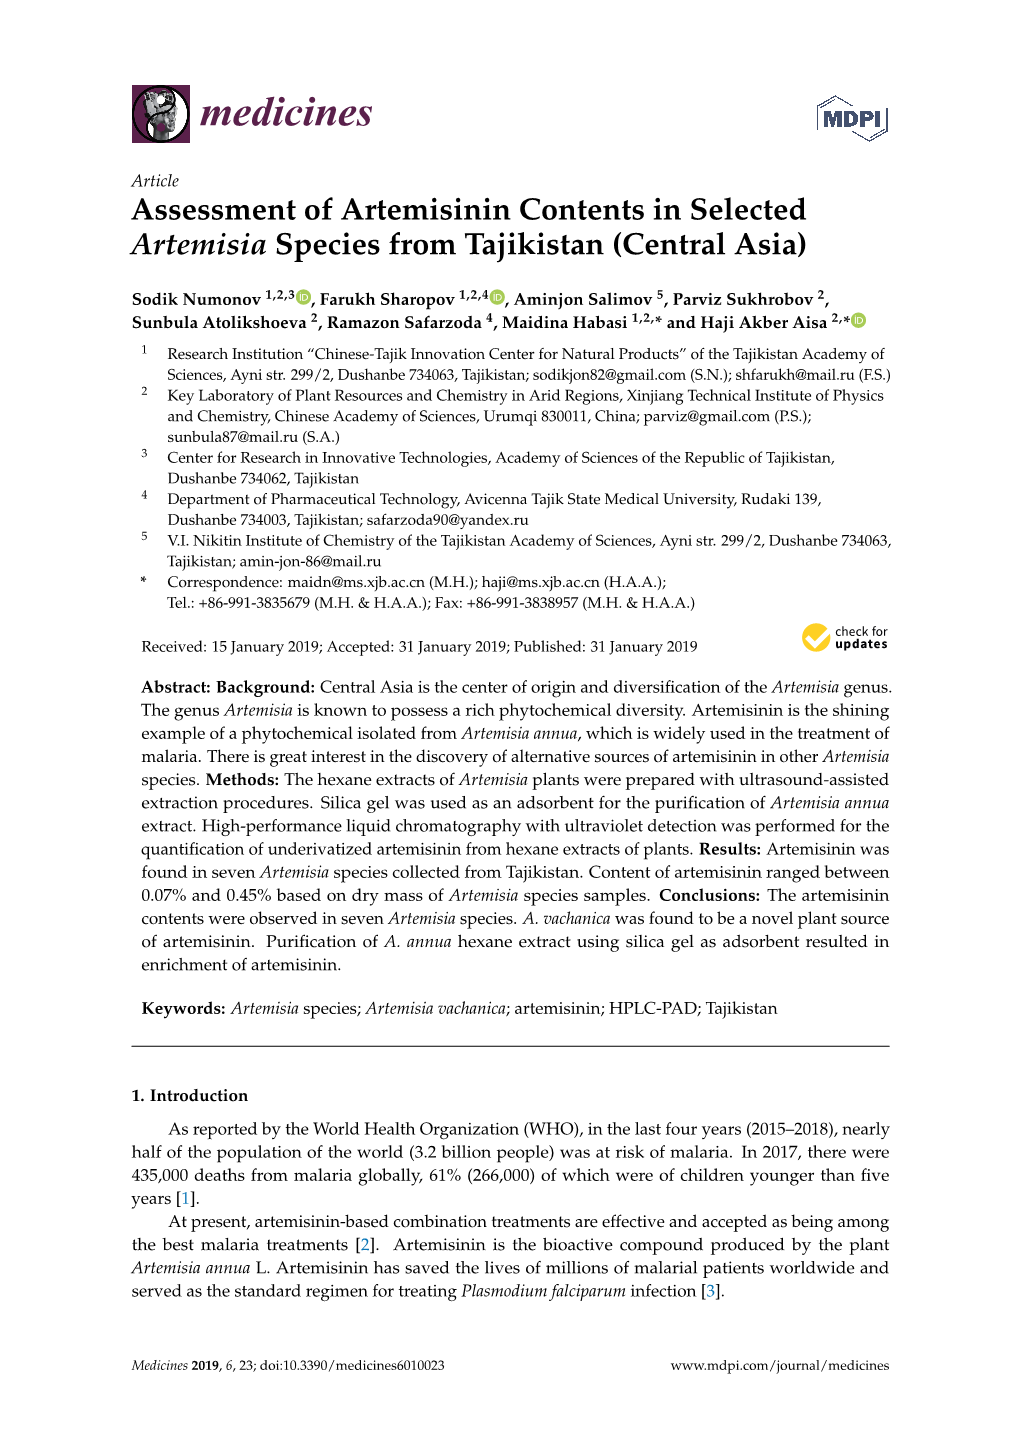 Assessment of Artemisinin Contents in Selected Artemisia Species from Tajikistan (Central Asia)